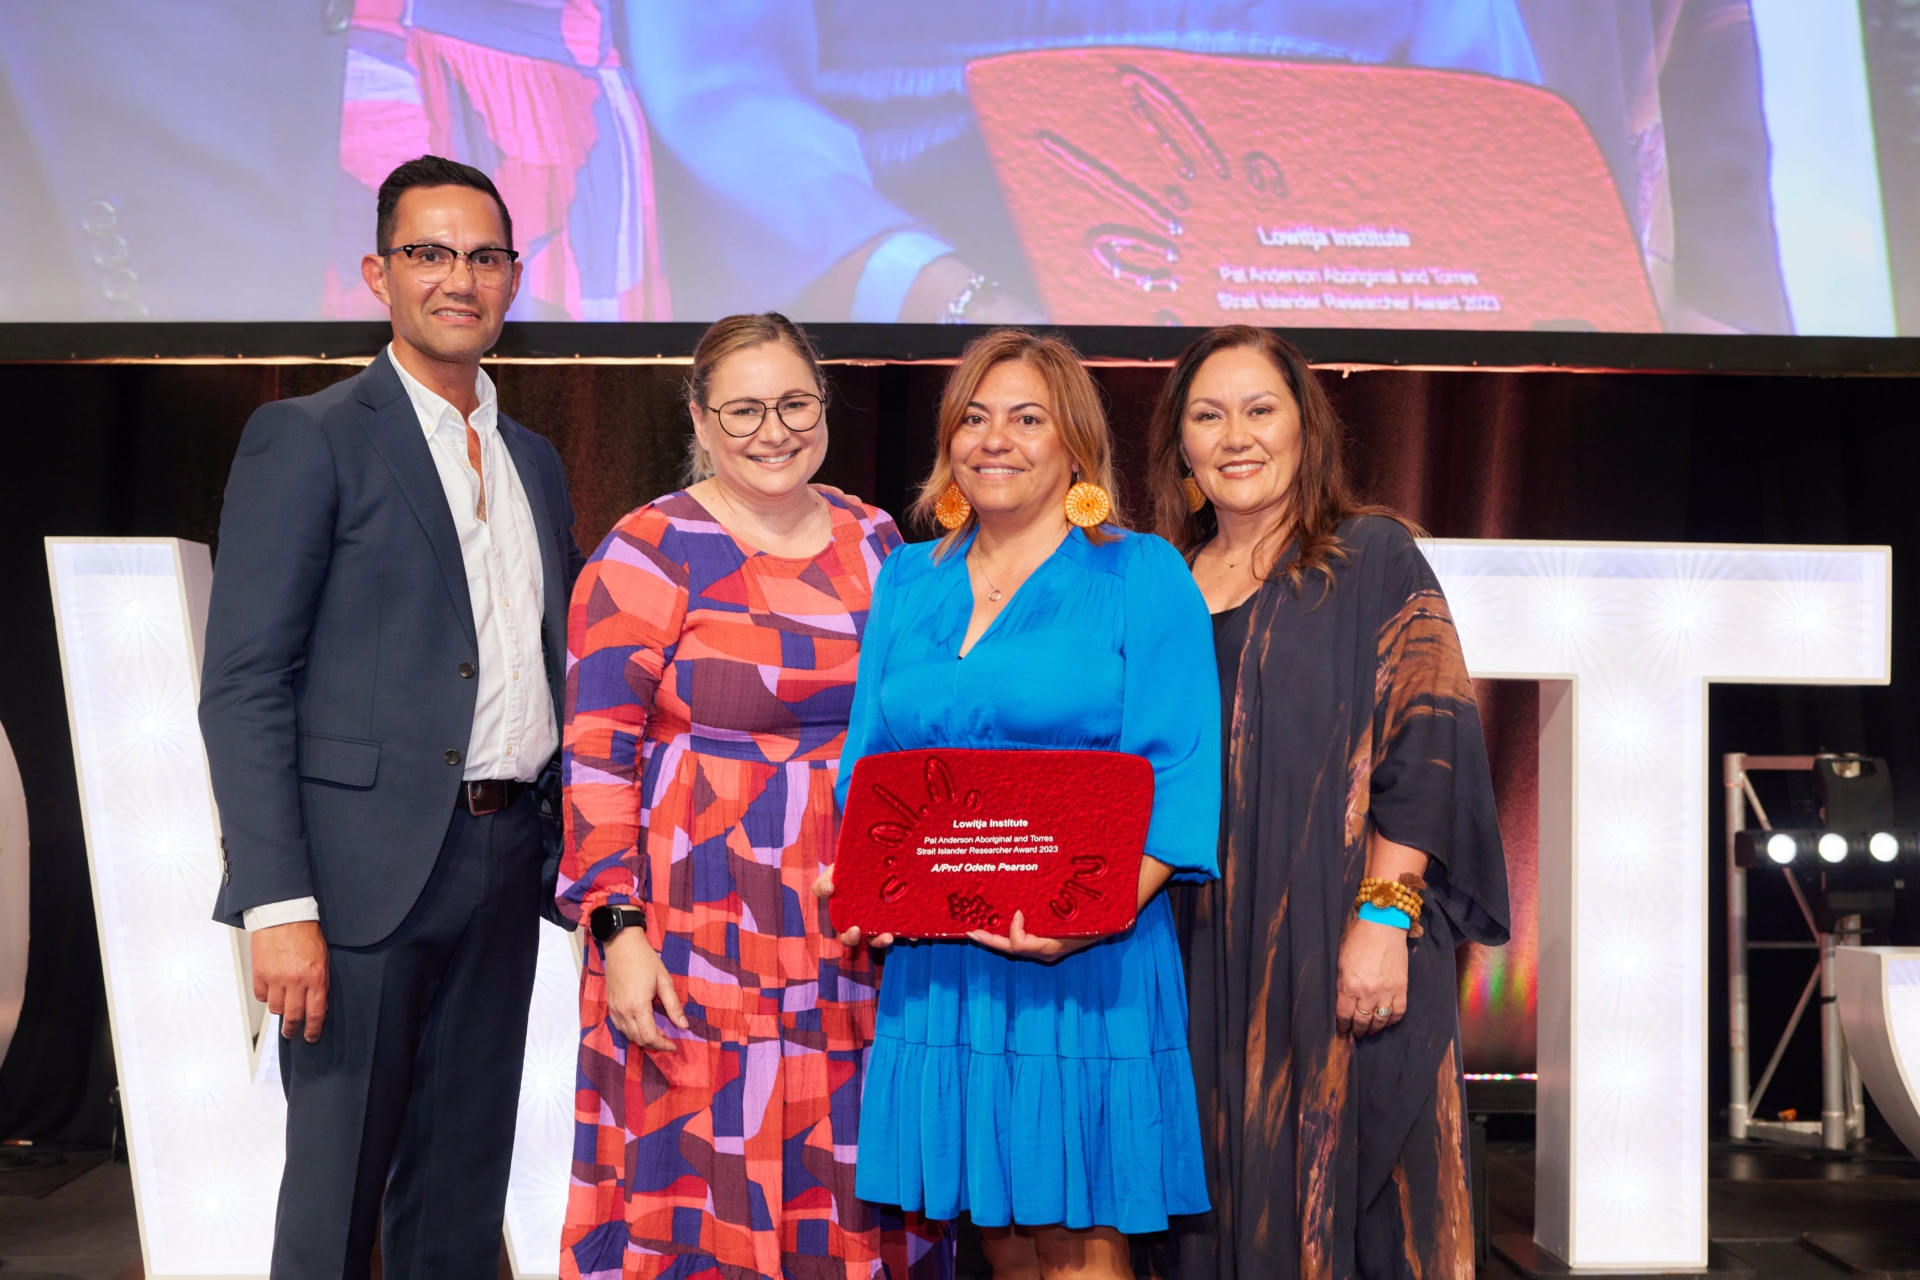 Prof Odette Pearson named winner of the Pat Anderson Aboriginal and Torres Strait Islander Research Award